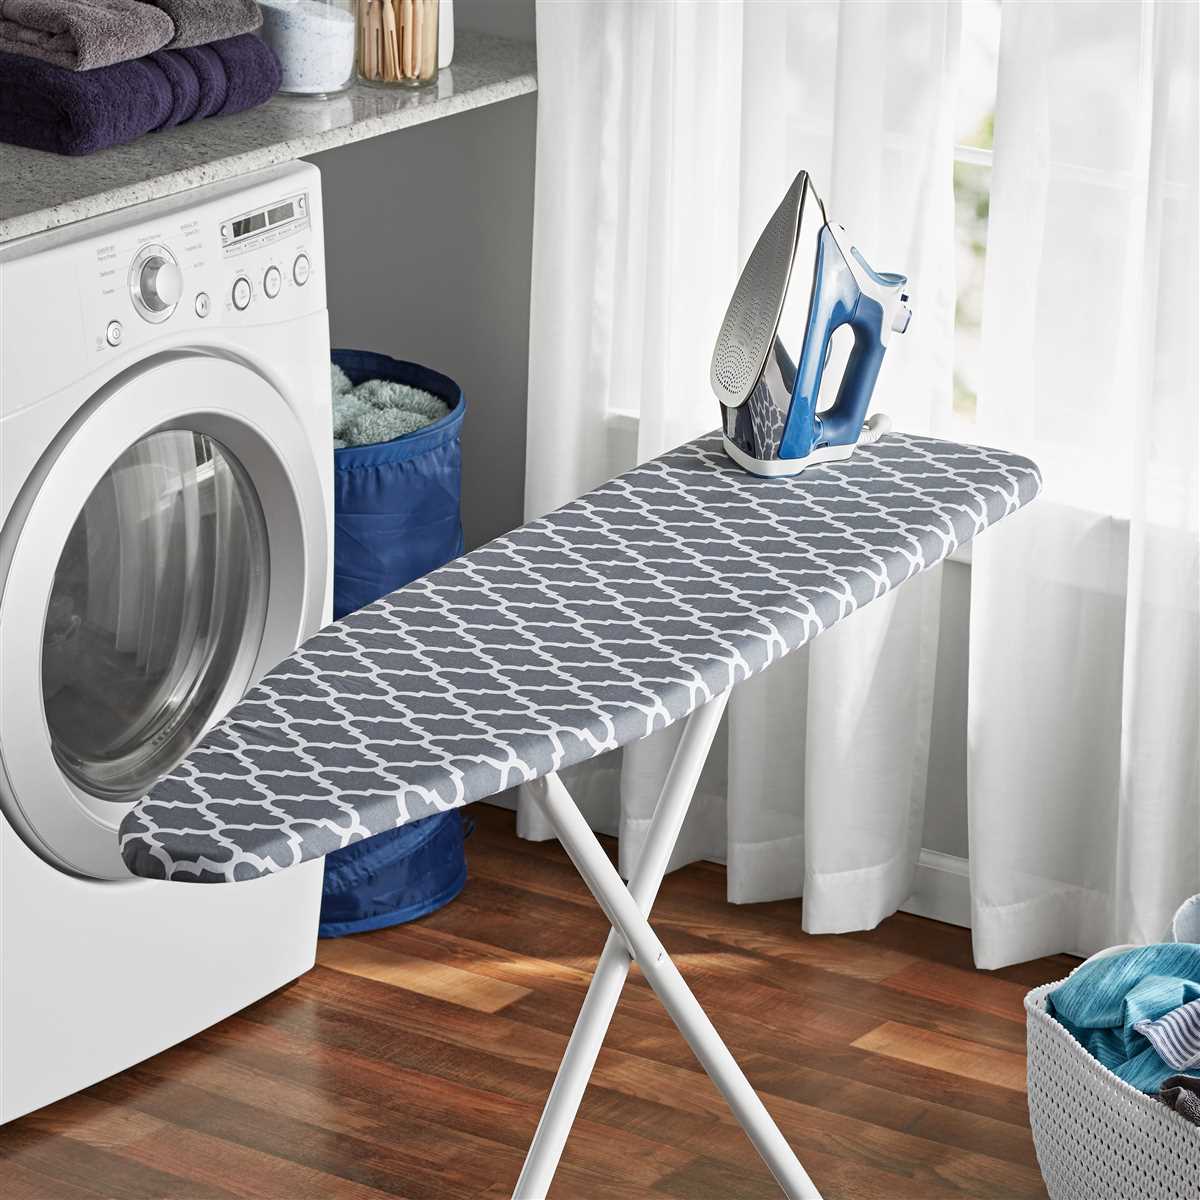 Factors to Consider When Choosing an Ironing Board Cover